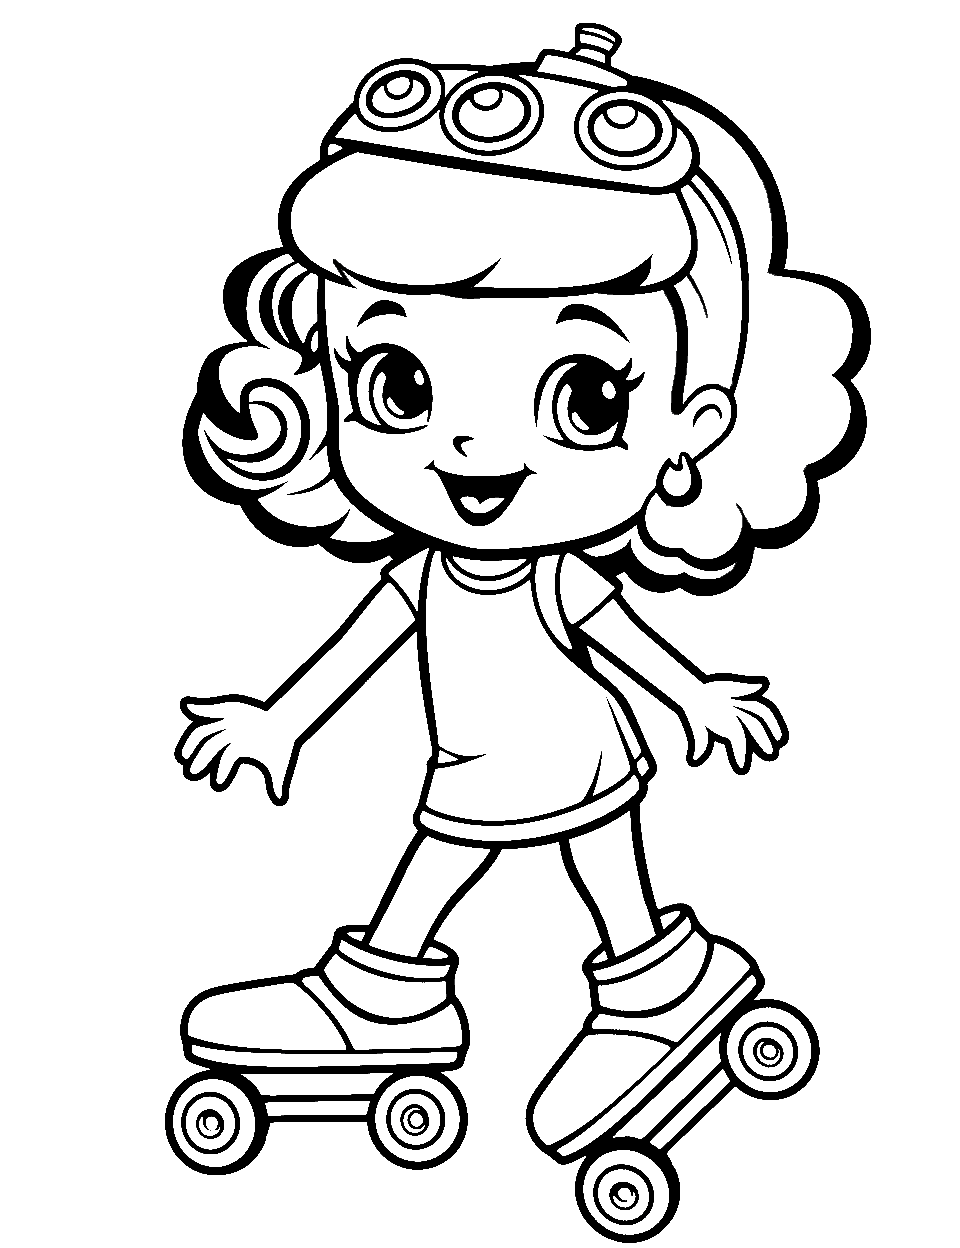 Roller Skating Coloring Page - Shopkin wearing roller skates, showing off its moves.